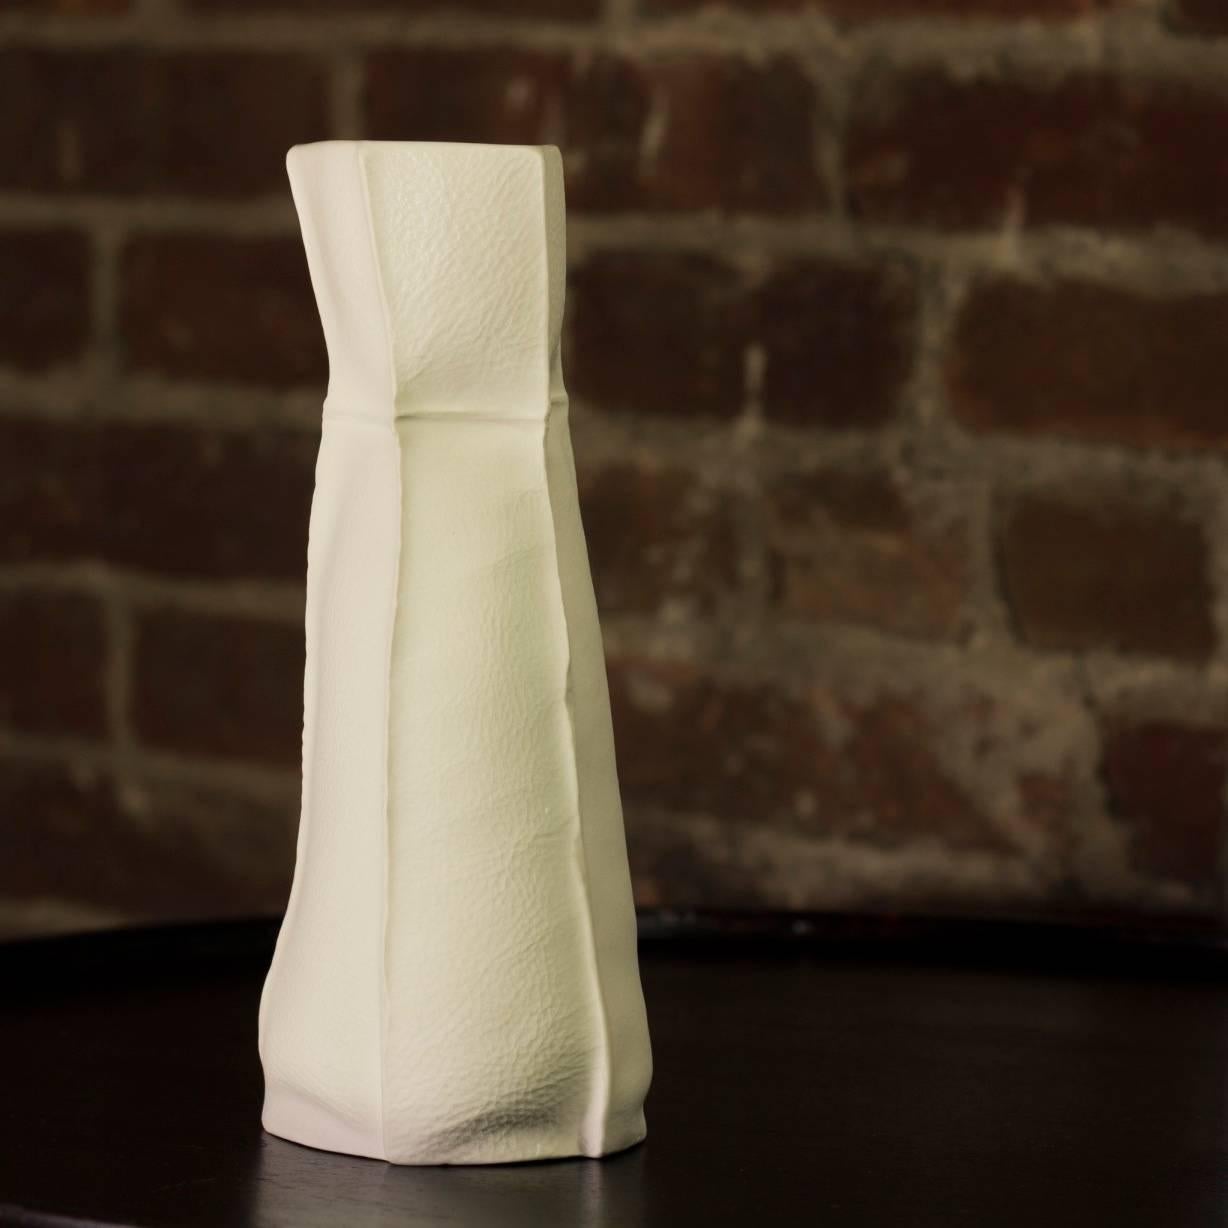 Cast Pair of Kawa Vases by Luft Tanaka, in Stock